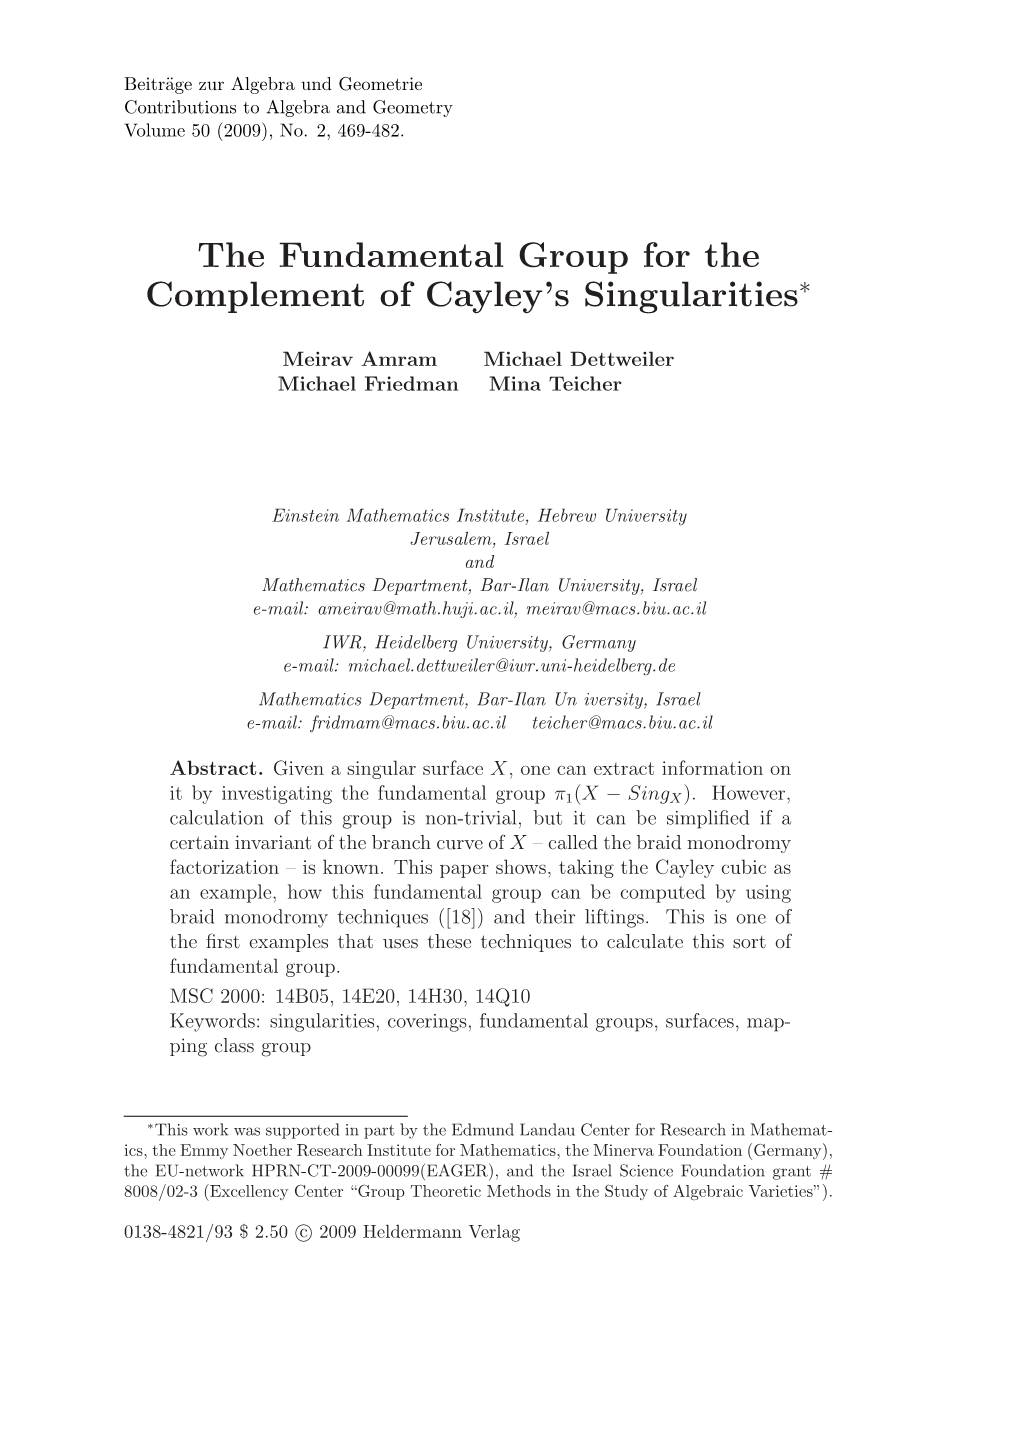 The Fundamental Group for the Complement of Cayley's Singularities